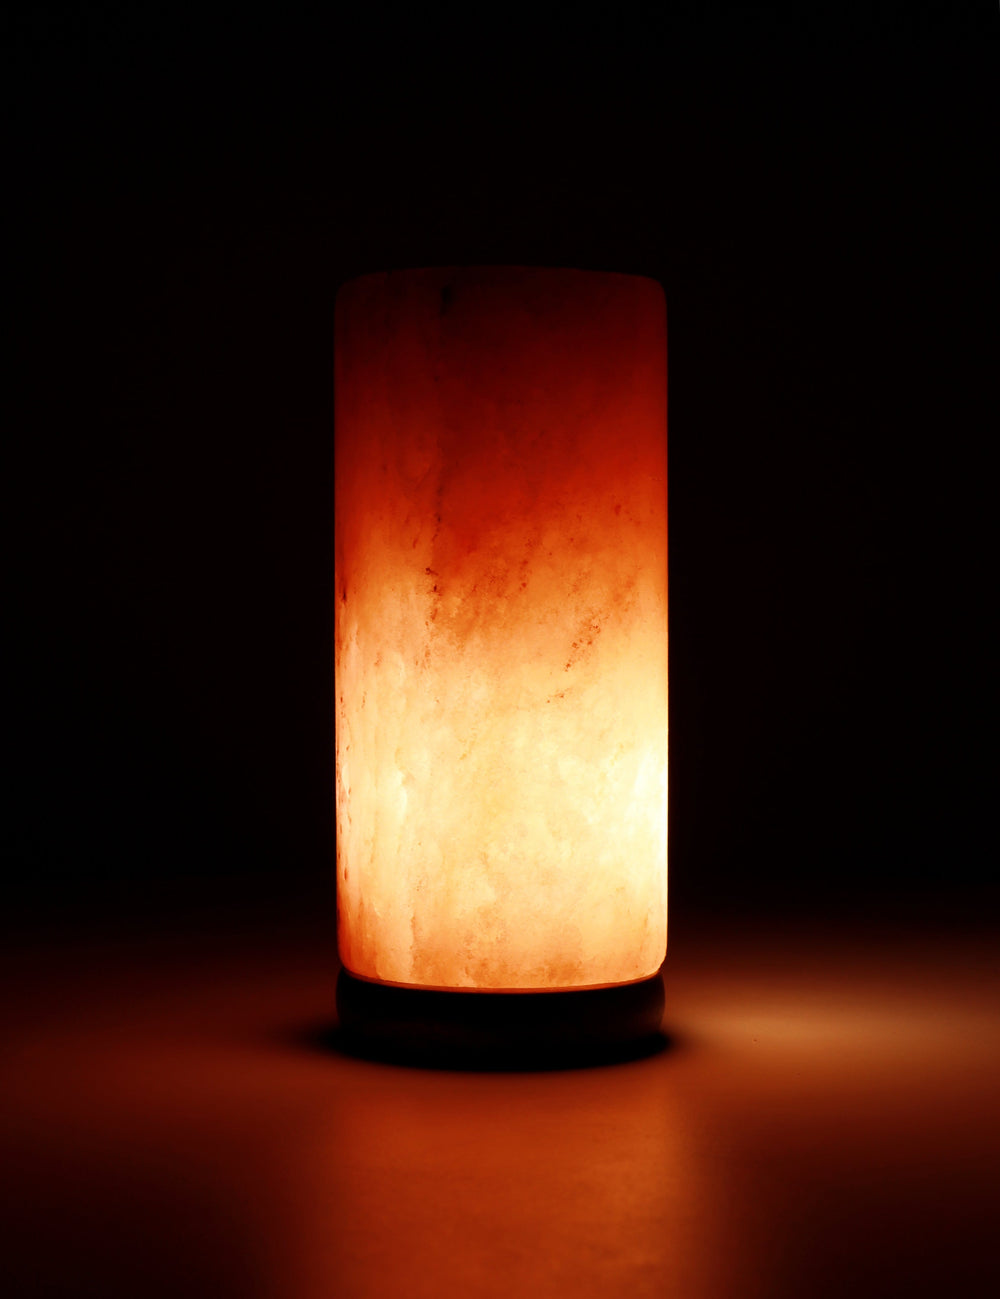 Himalayan Rock Salt Cylinder Lamp, 7 Inches Tall - Soft Calm Therapeutic Light - Smoothly Carved Handcrafted Cylindrical Design - Finished Wood Base - Tibetan Evaporated Rock Lamps - , Dark Orange Hue